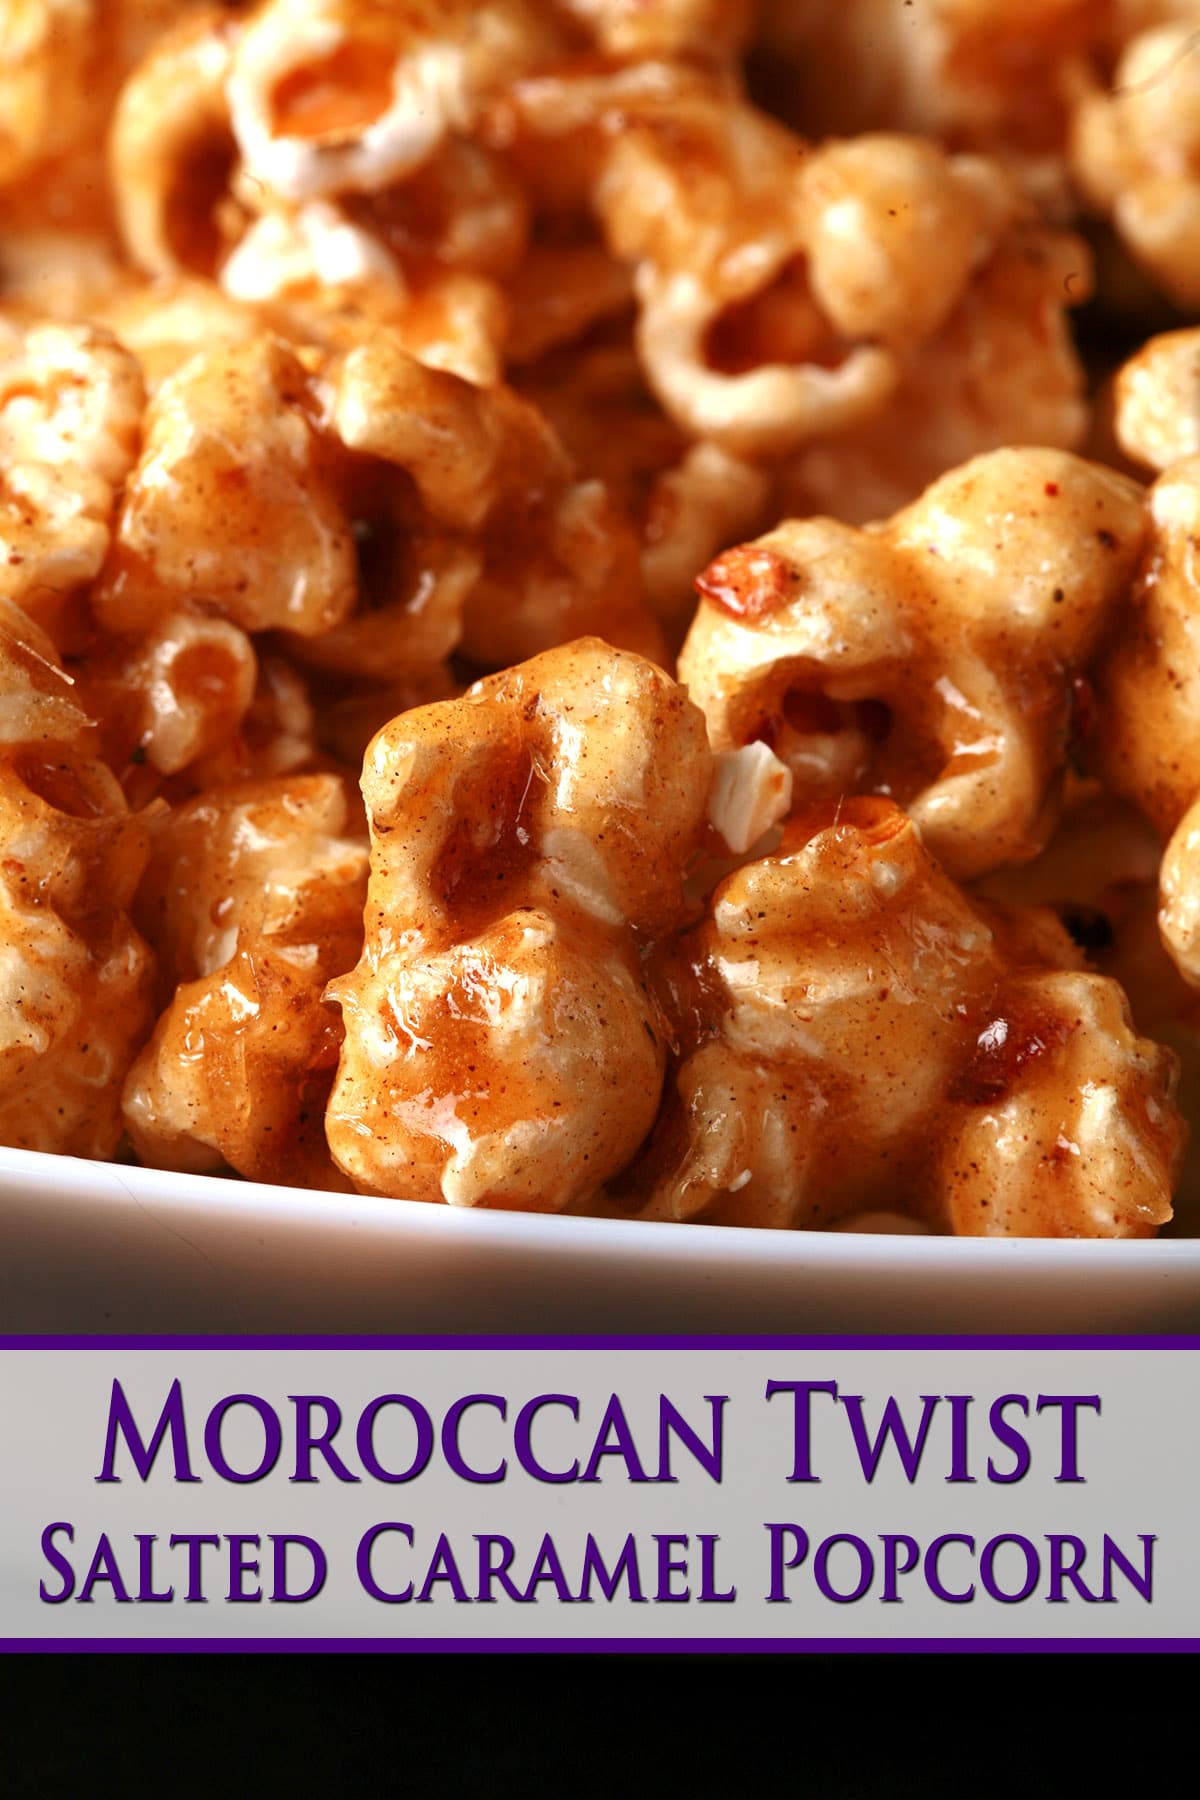 Close up view of a bowl of Moroccan Twist Salted Caramel Popcorn.